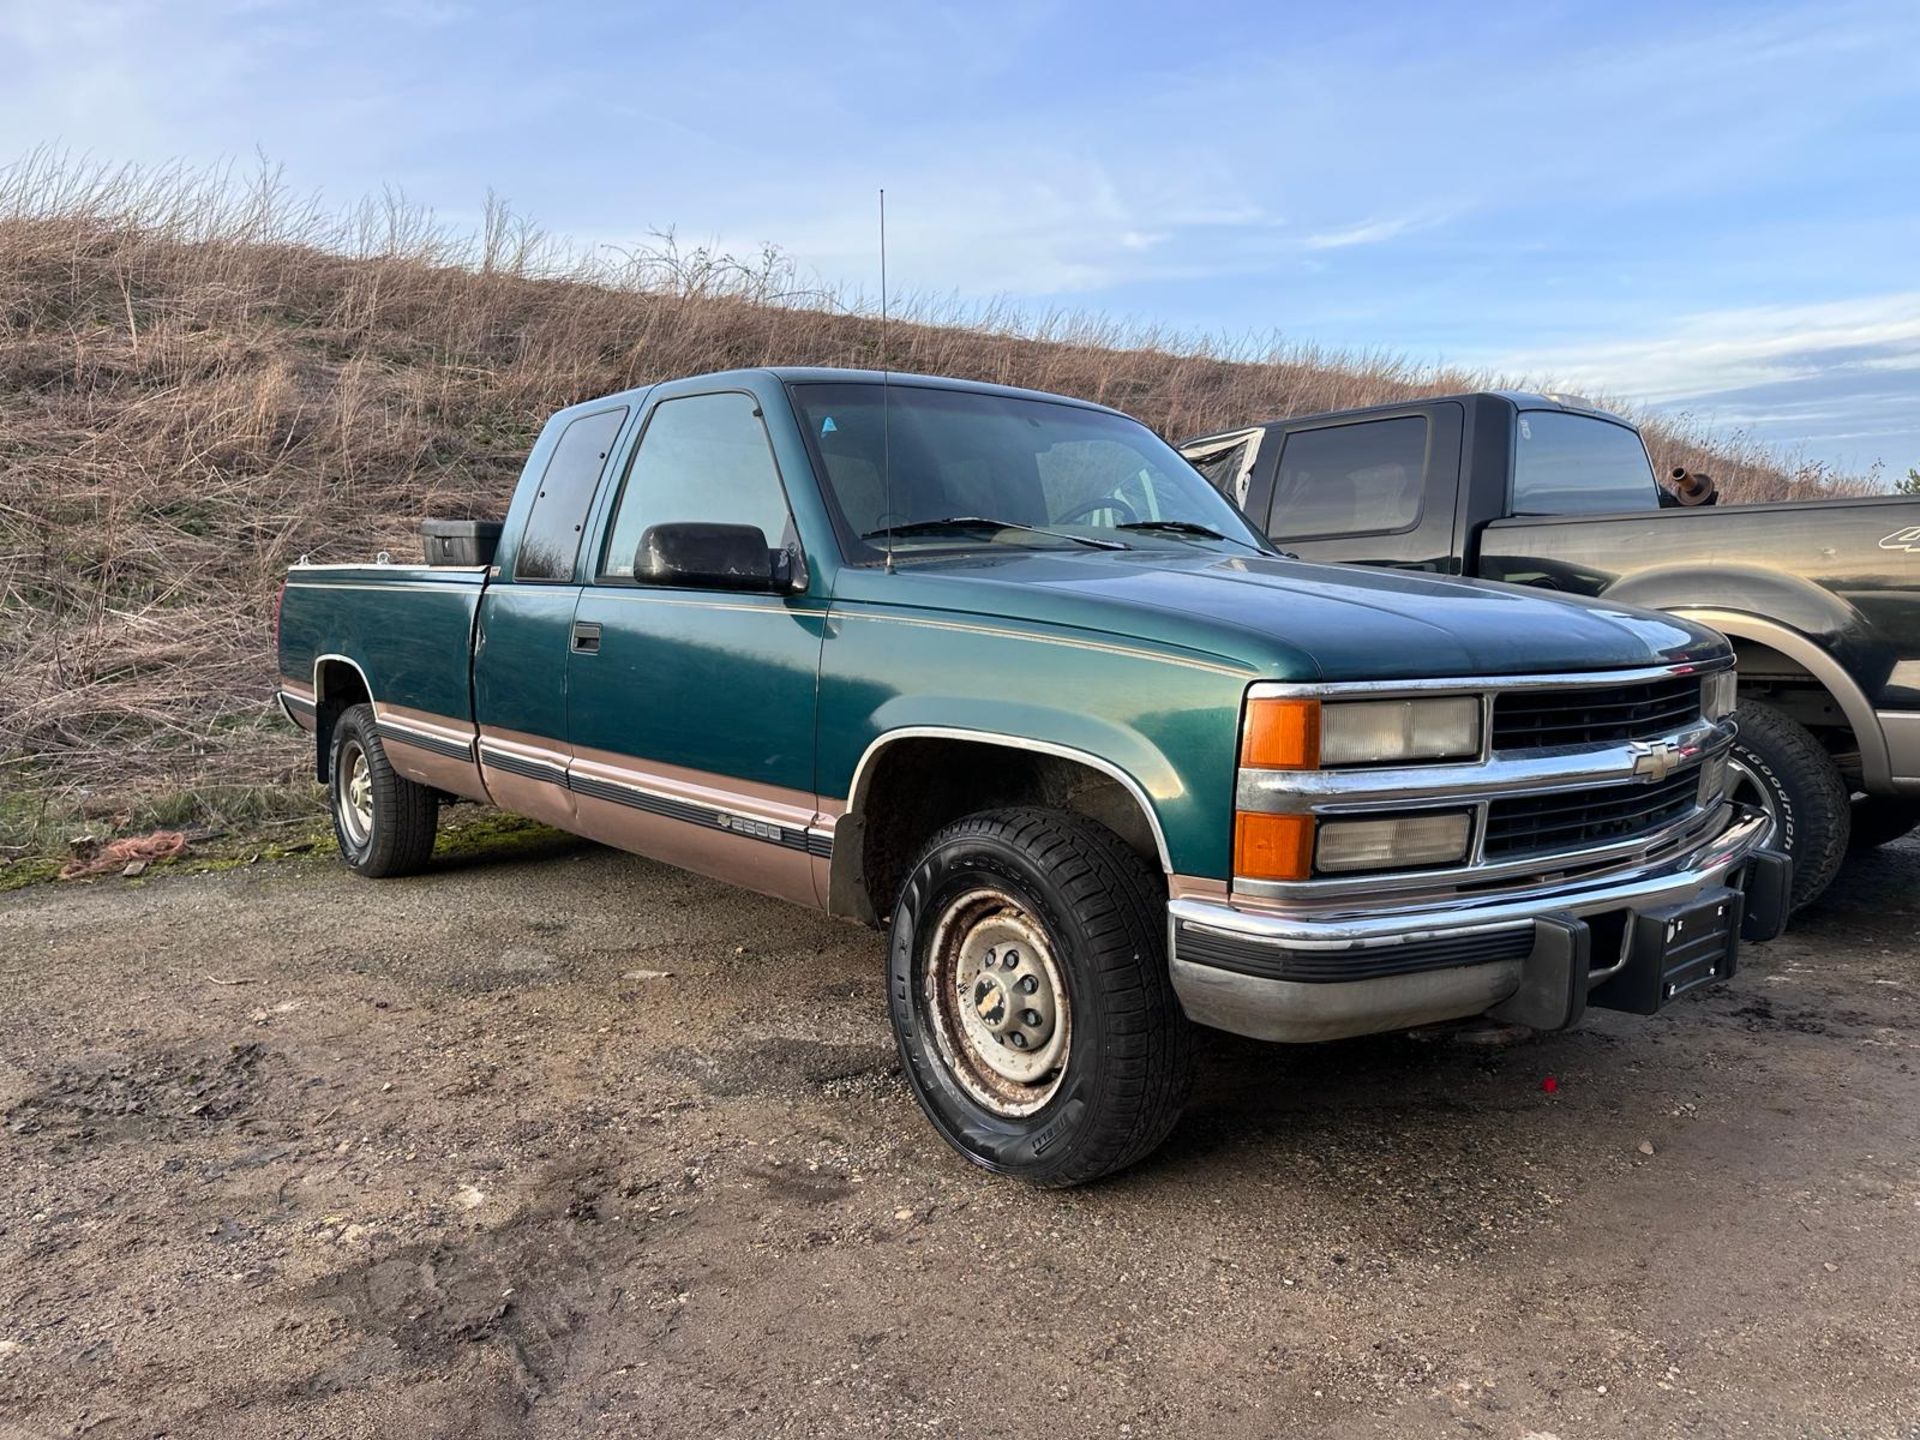 1995 CHEVROLET C2500 - 6.5 V8 TURBO DIESEL - AUTOMATIC GEARBOX - 129,646 MILES